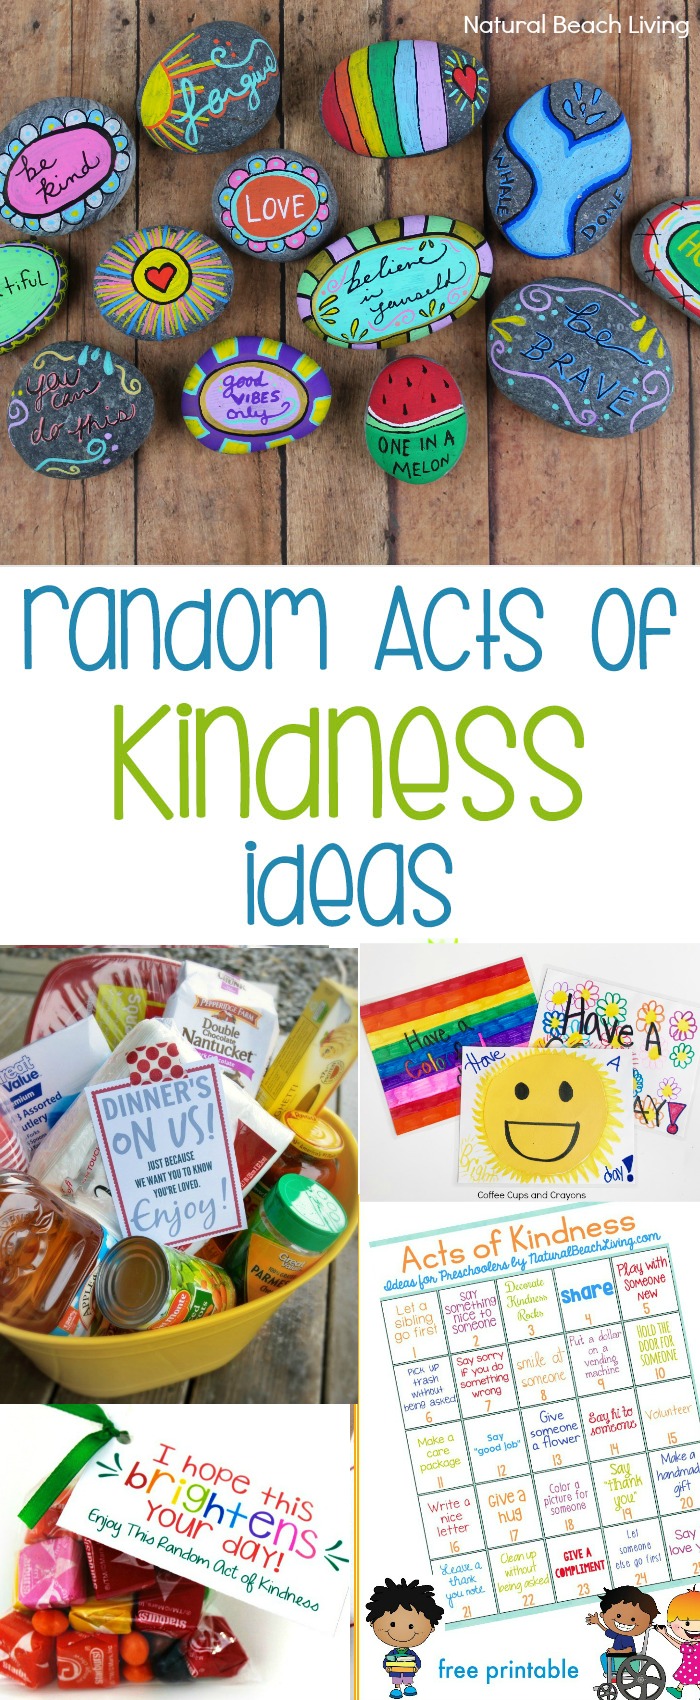 200+ Ideas for Random Acts of Kindness – Kindness Ideas